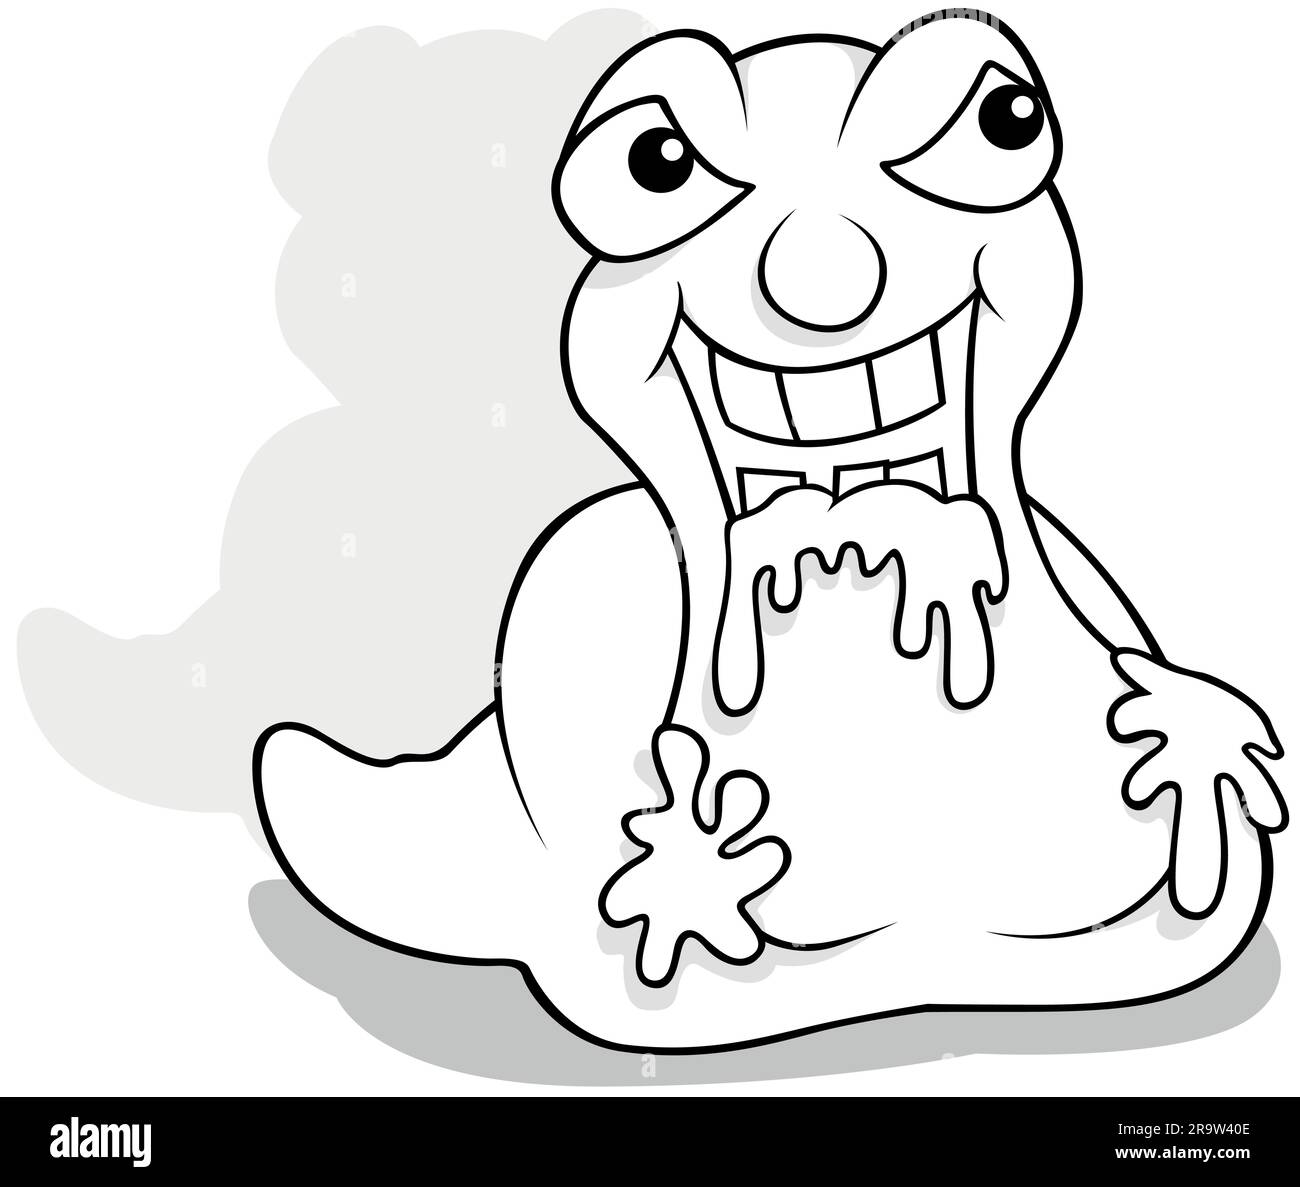 Drawing of a Funny Garbage Monster with Slime Stock Vector